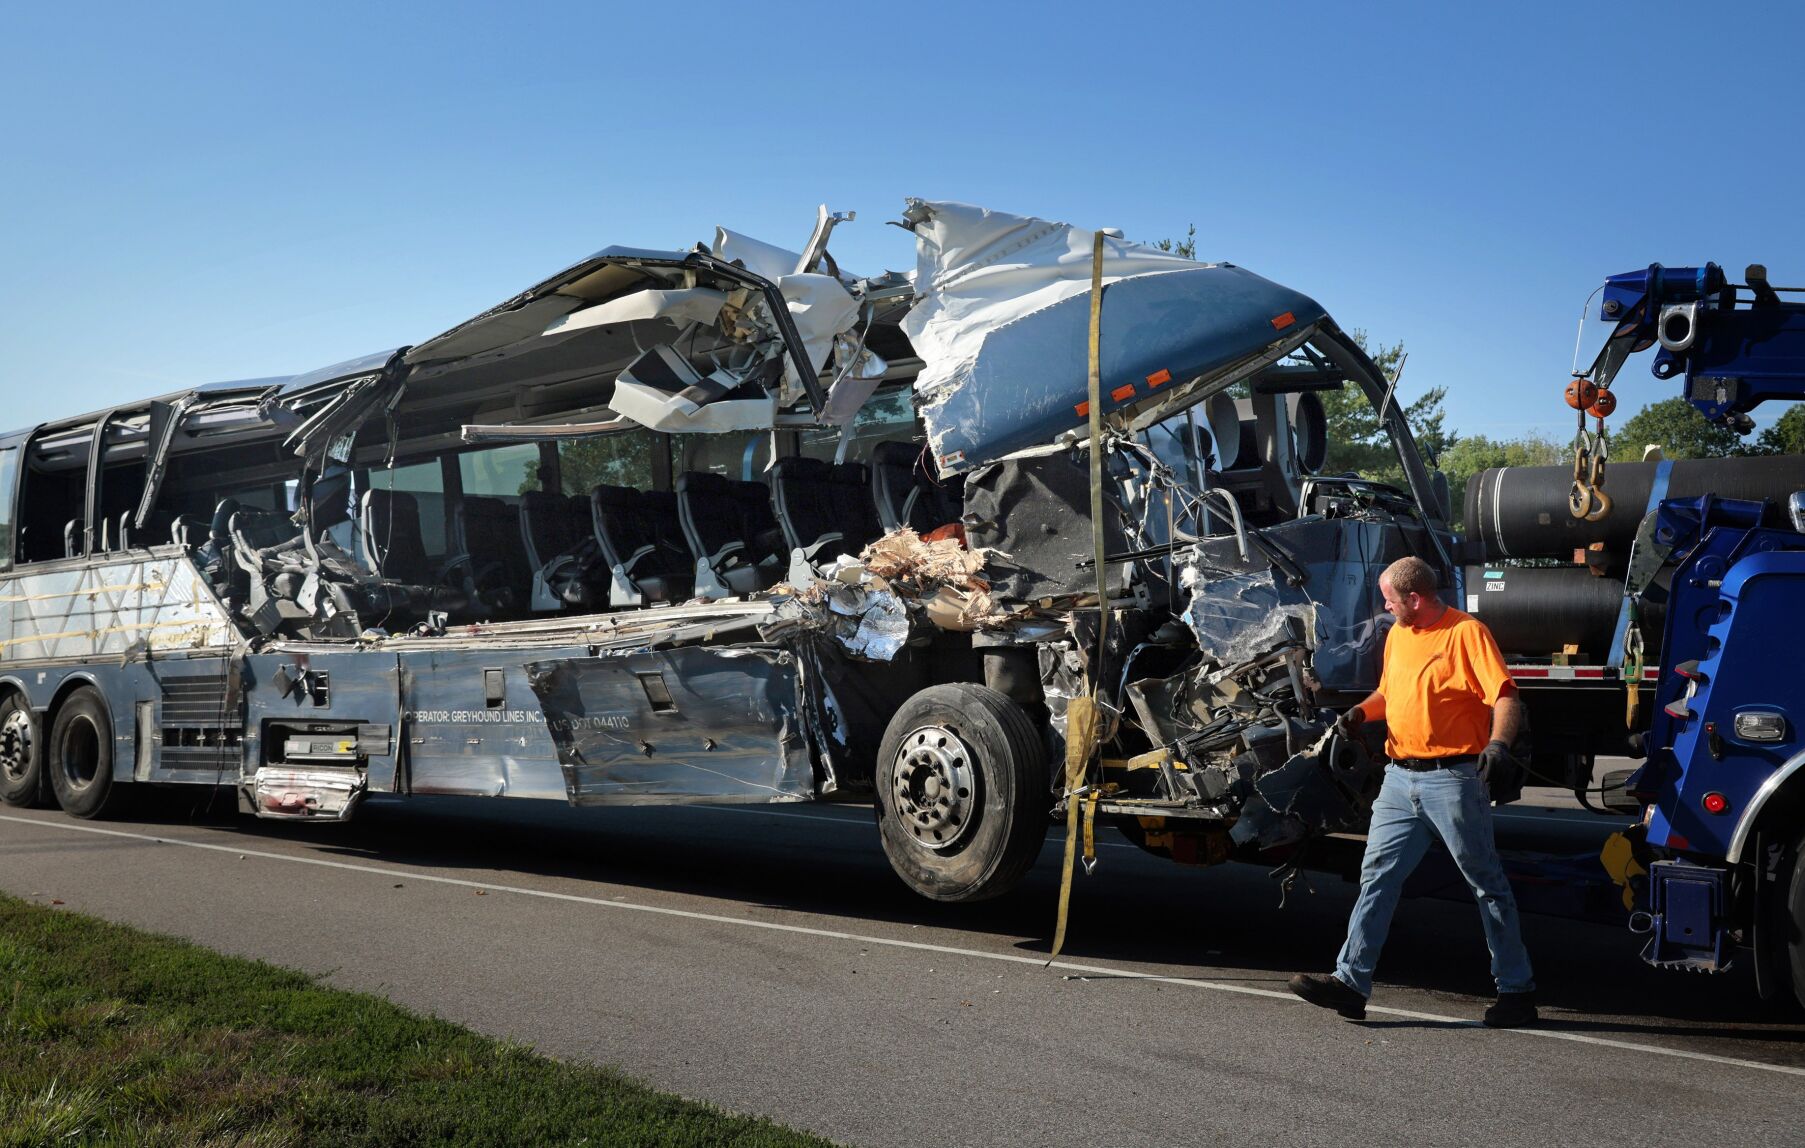 Greyhound Bus Accident in Alabama Results in at Least 1 Fatality and Multiple Injuries